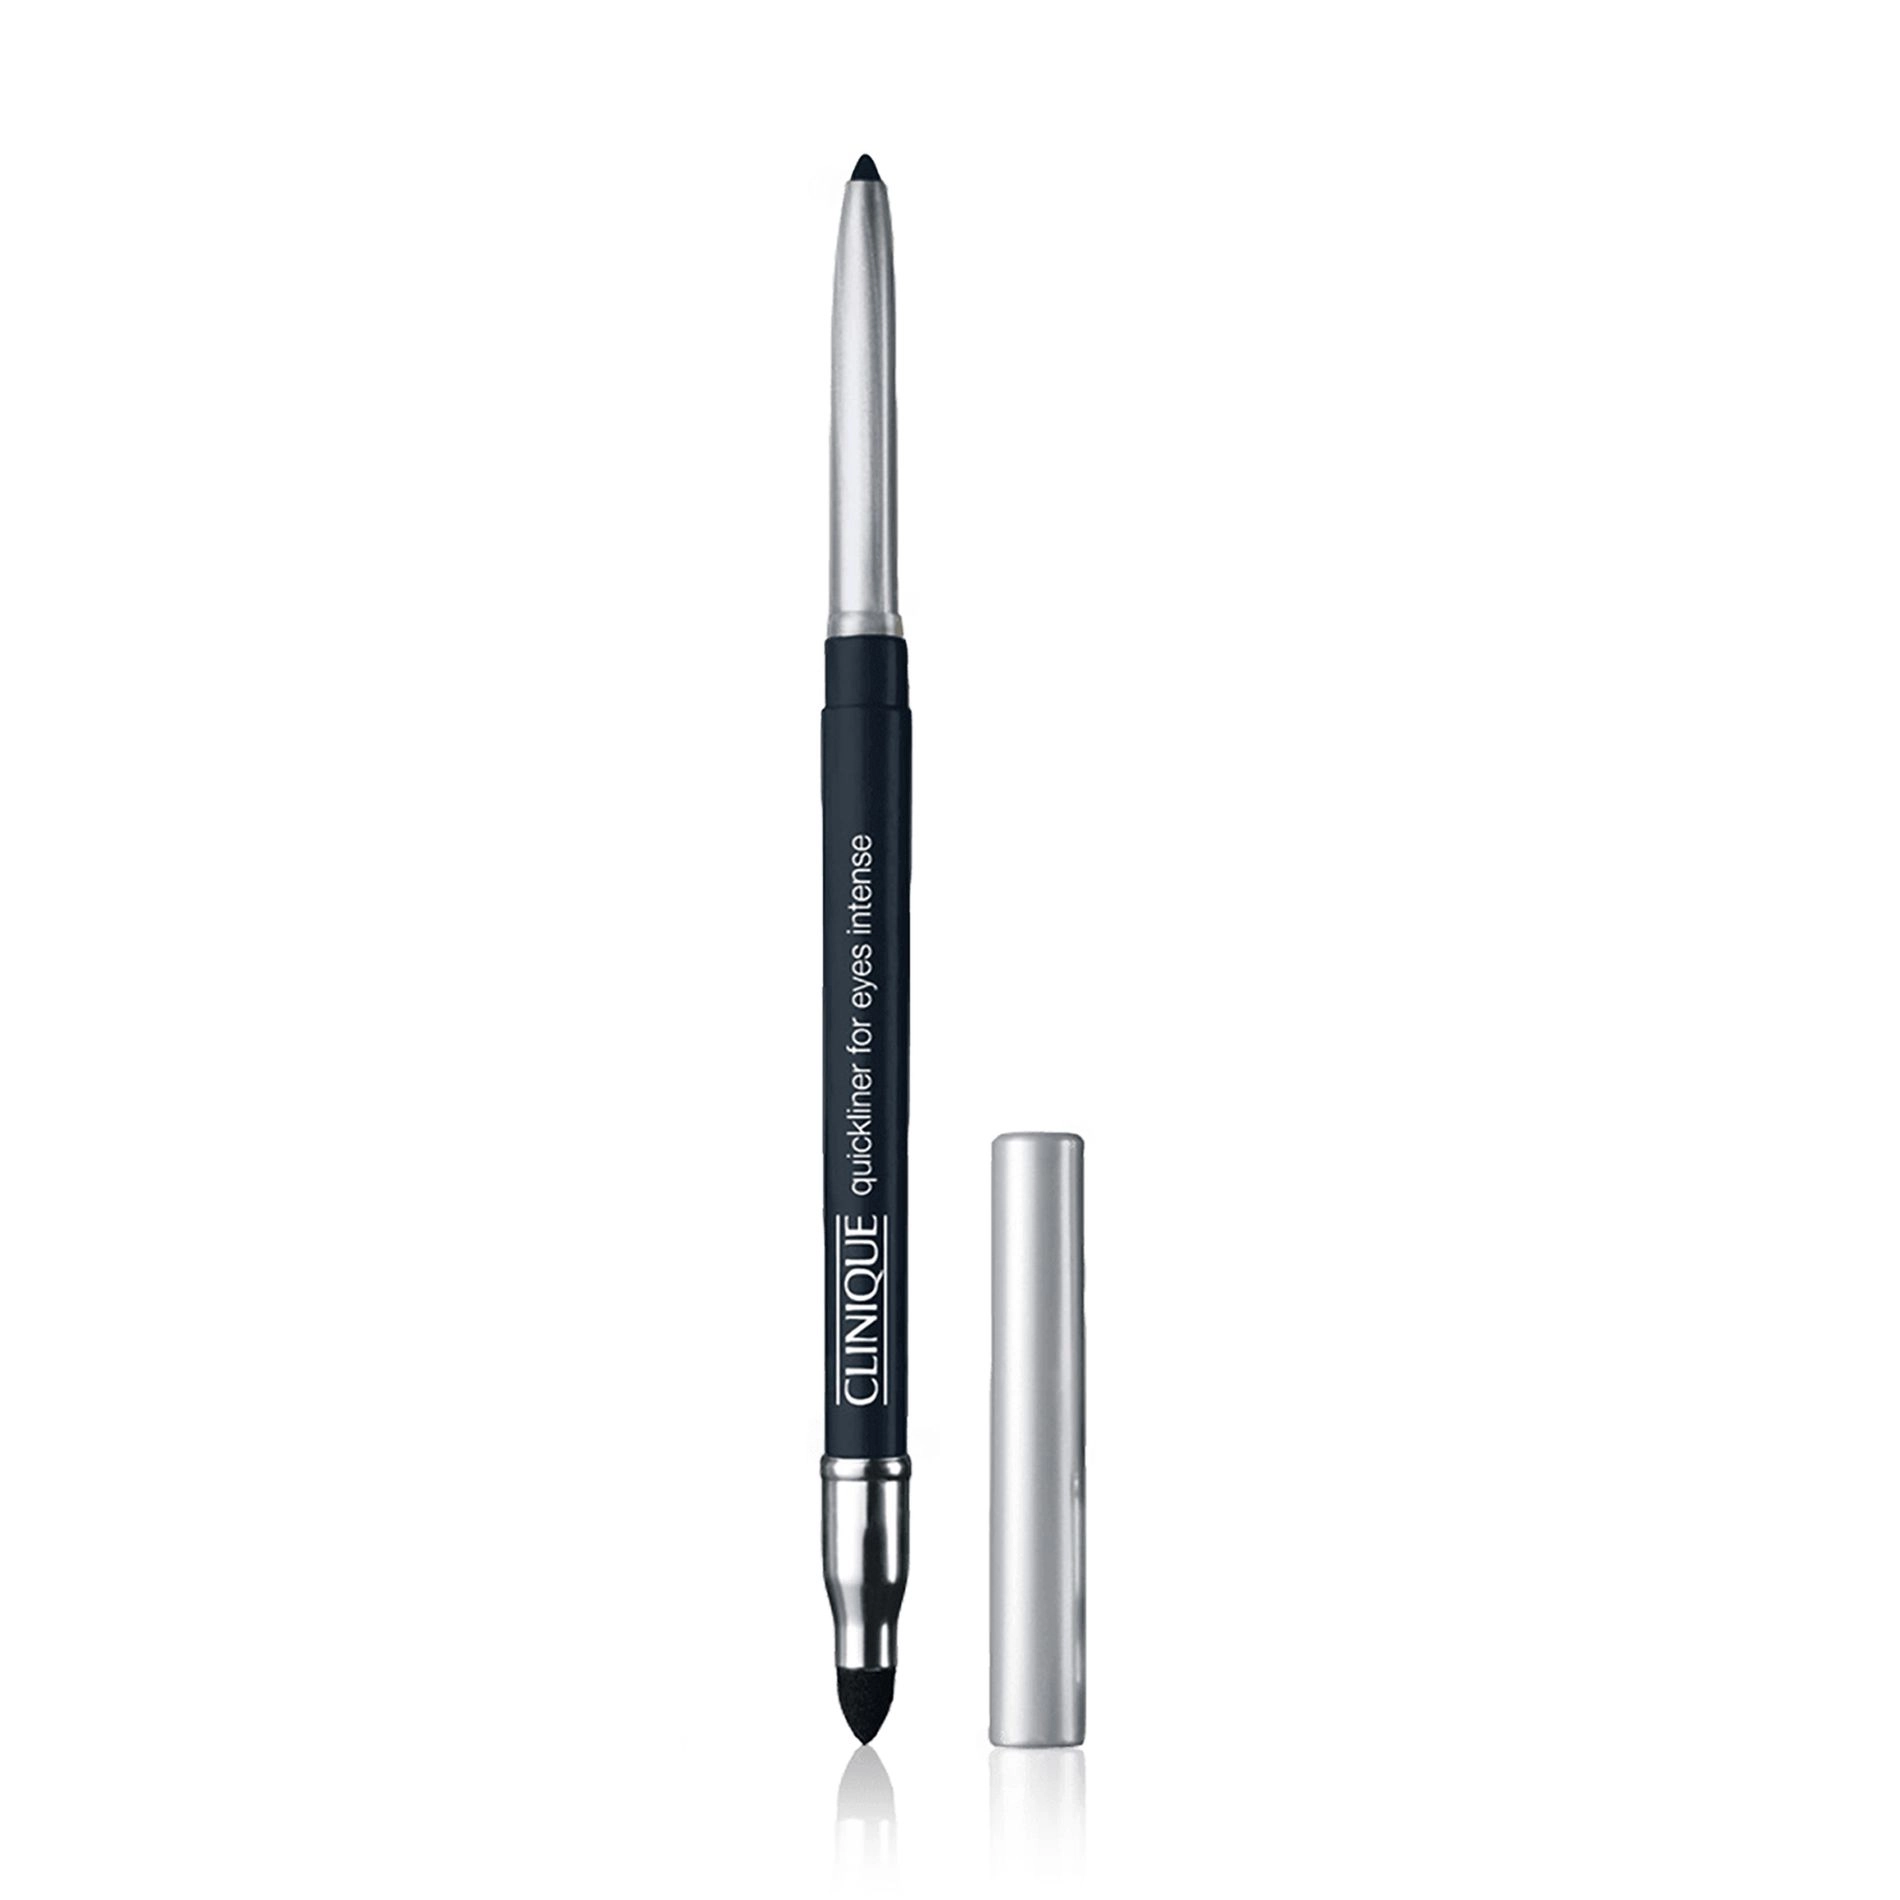 Clinique Карандаш для глаз Quickliner For Eyes Intense, 0.28 г - фото N1